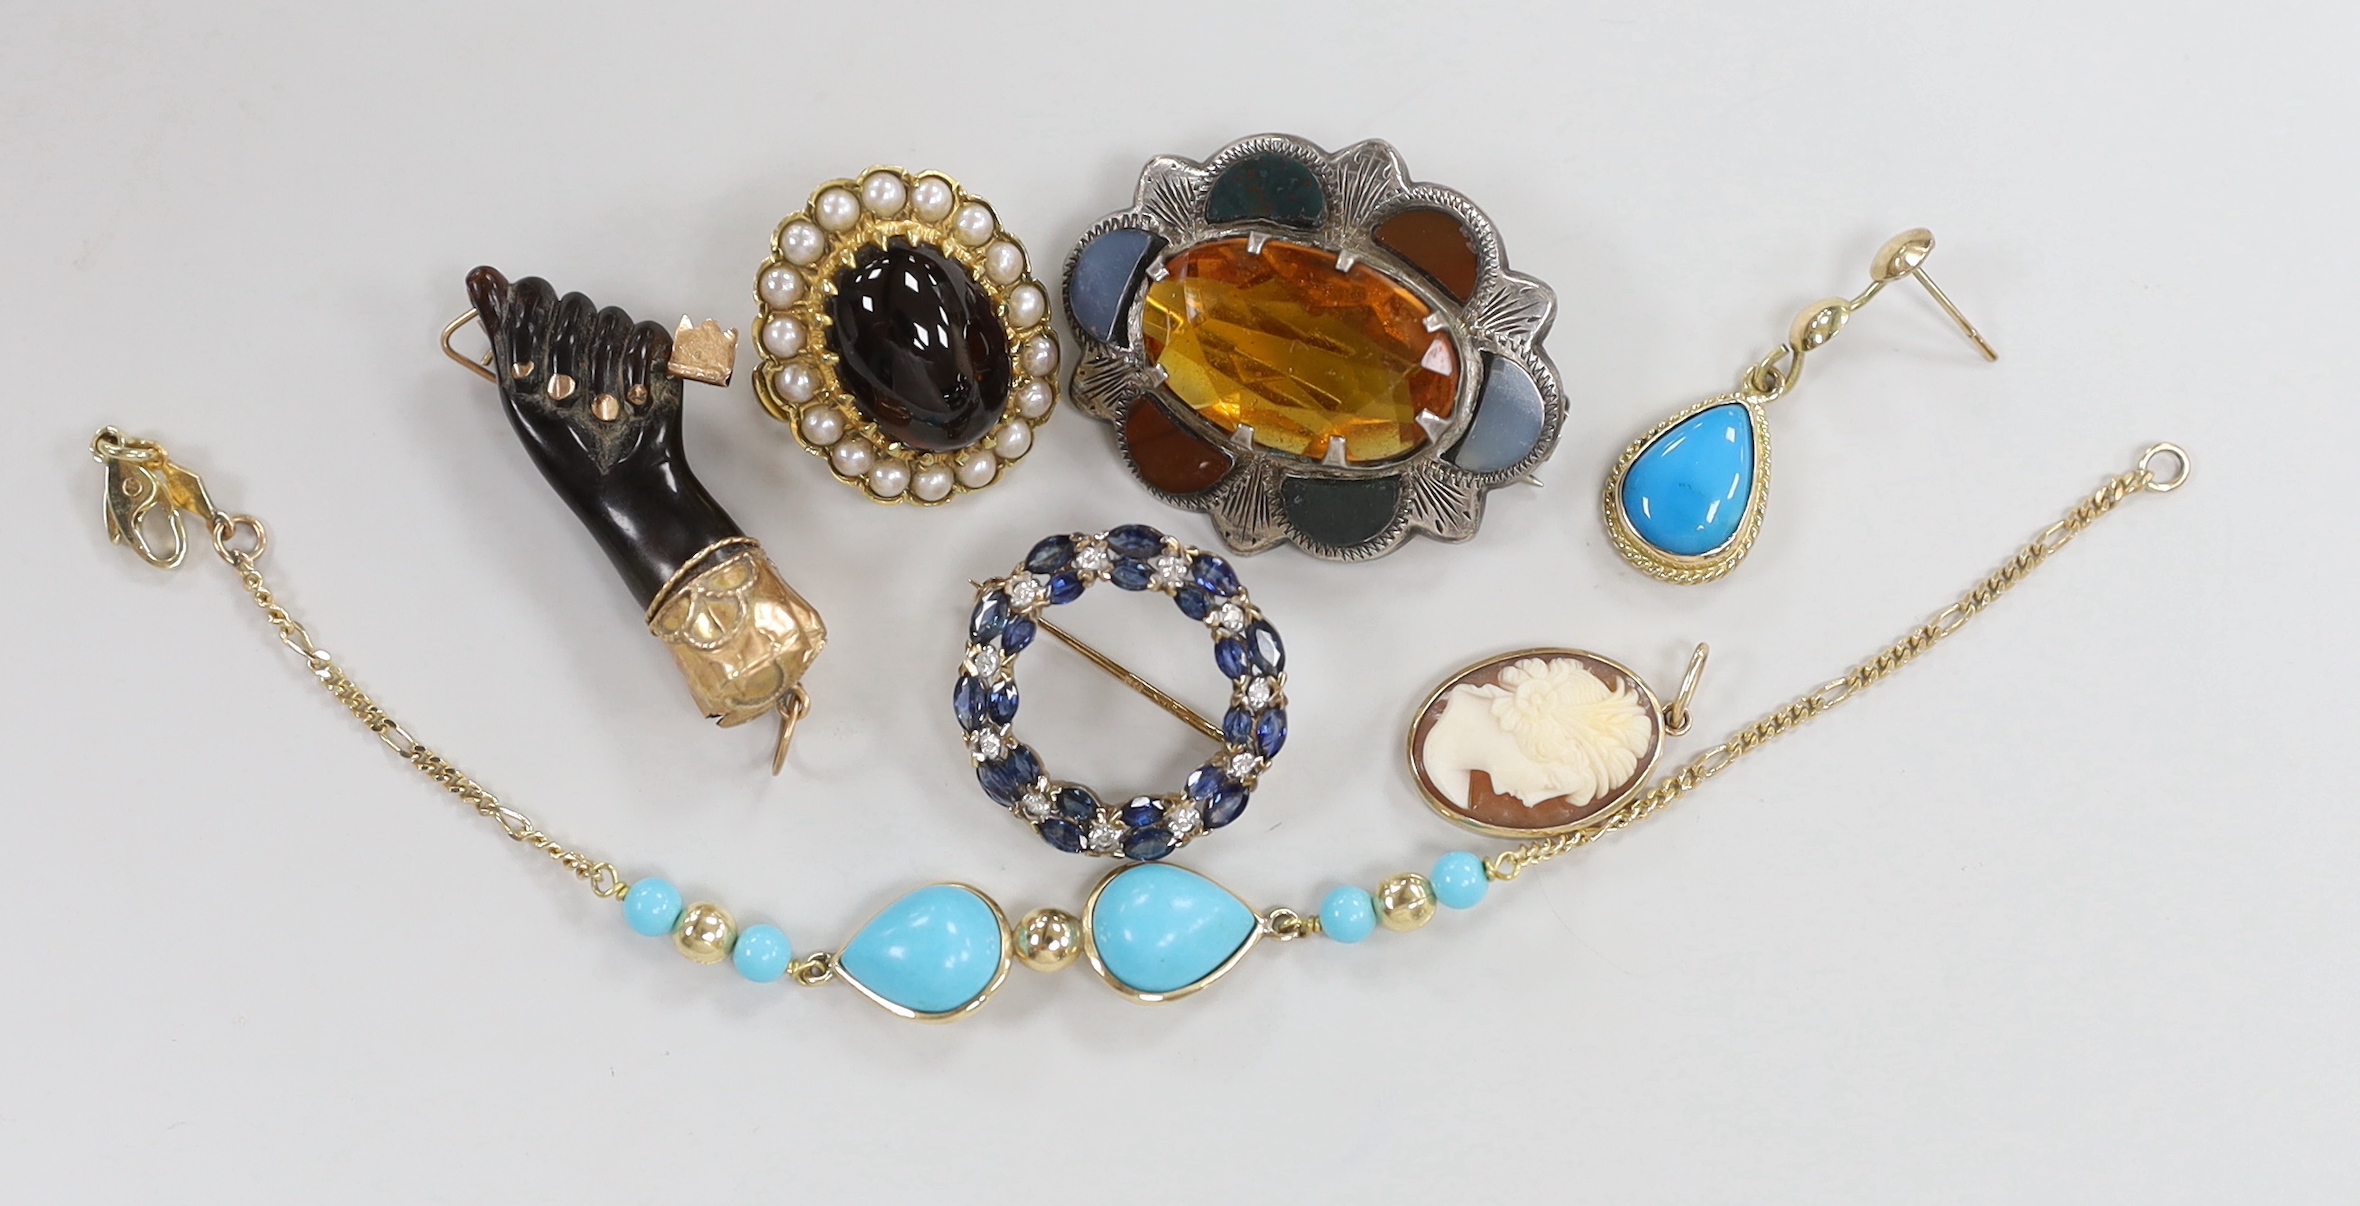 A 585 yellow metal and simulated turquoise set bracelet, A Victorian yellow metal mounted clasped hand with key charm and five other items including Scottish hardstone brooch and a 375 and gem set brooch.